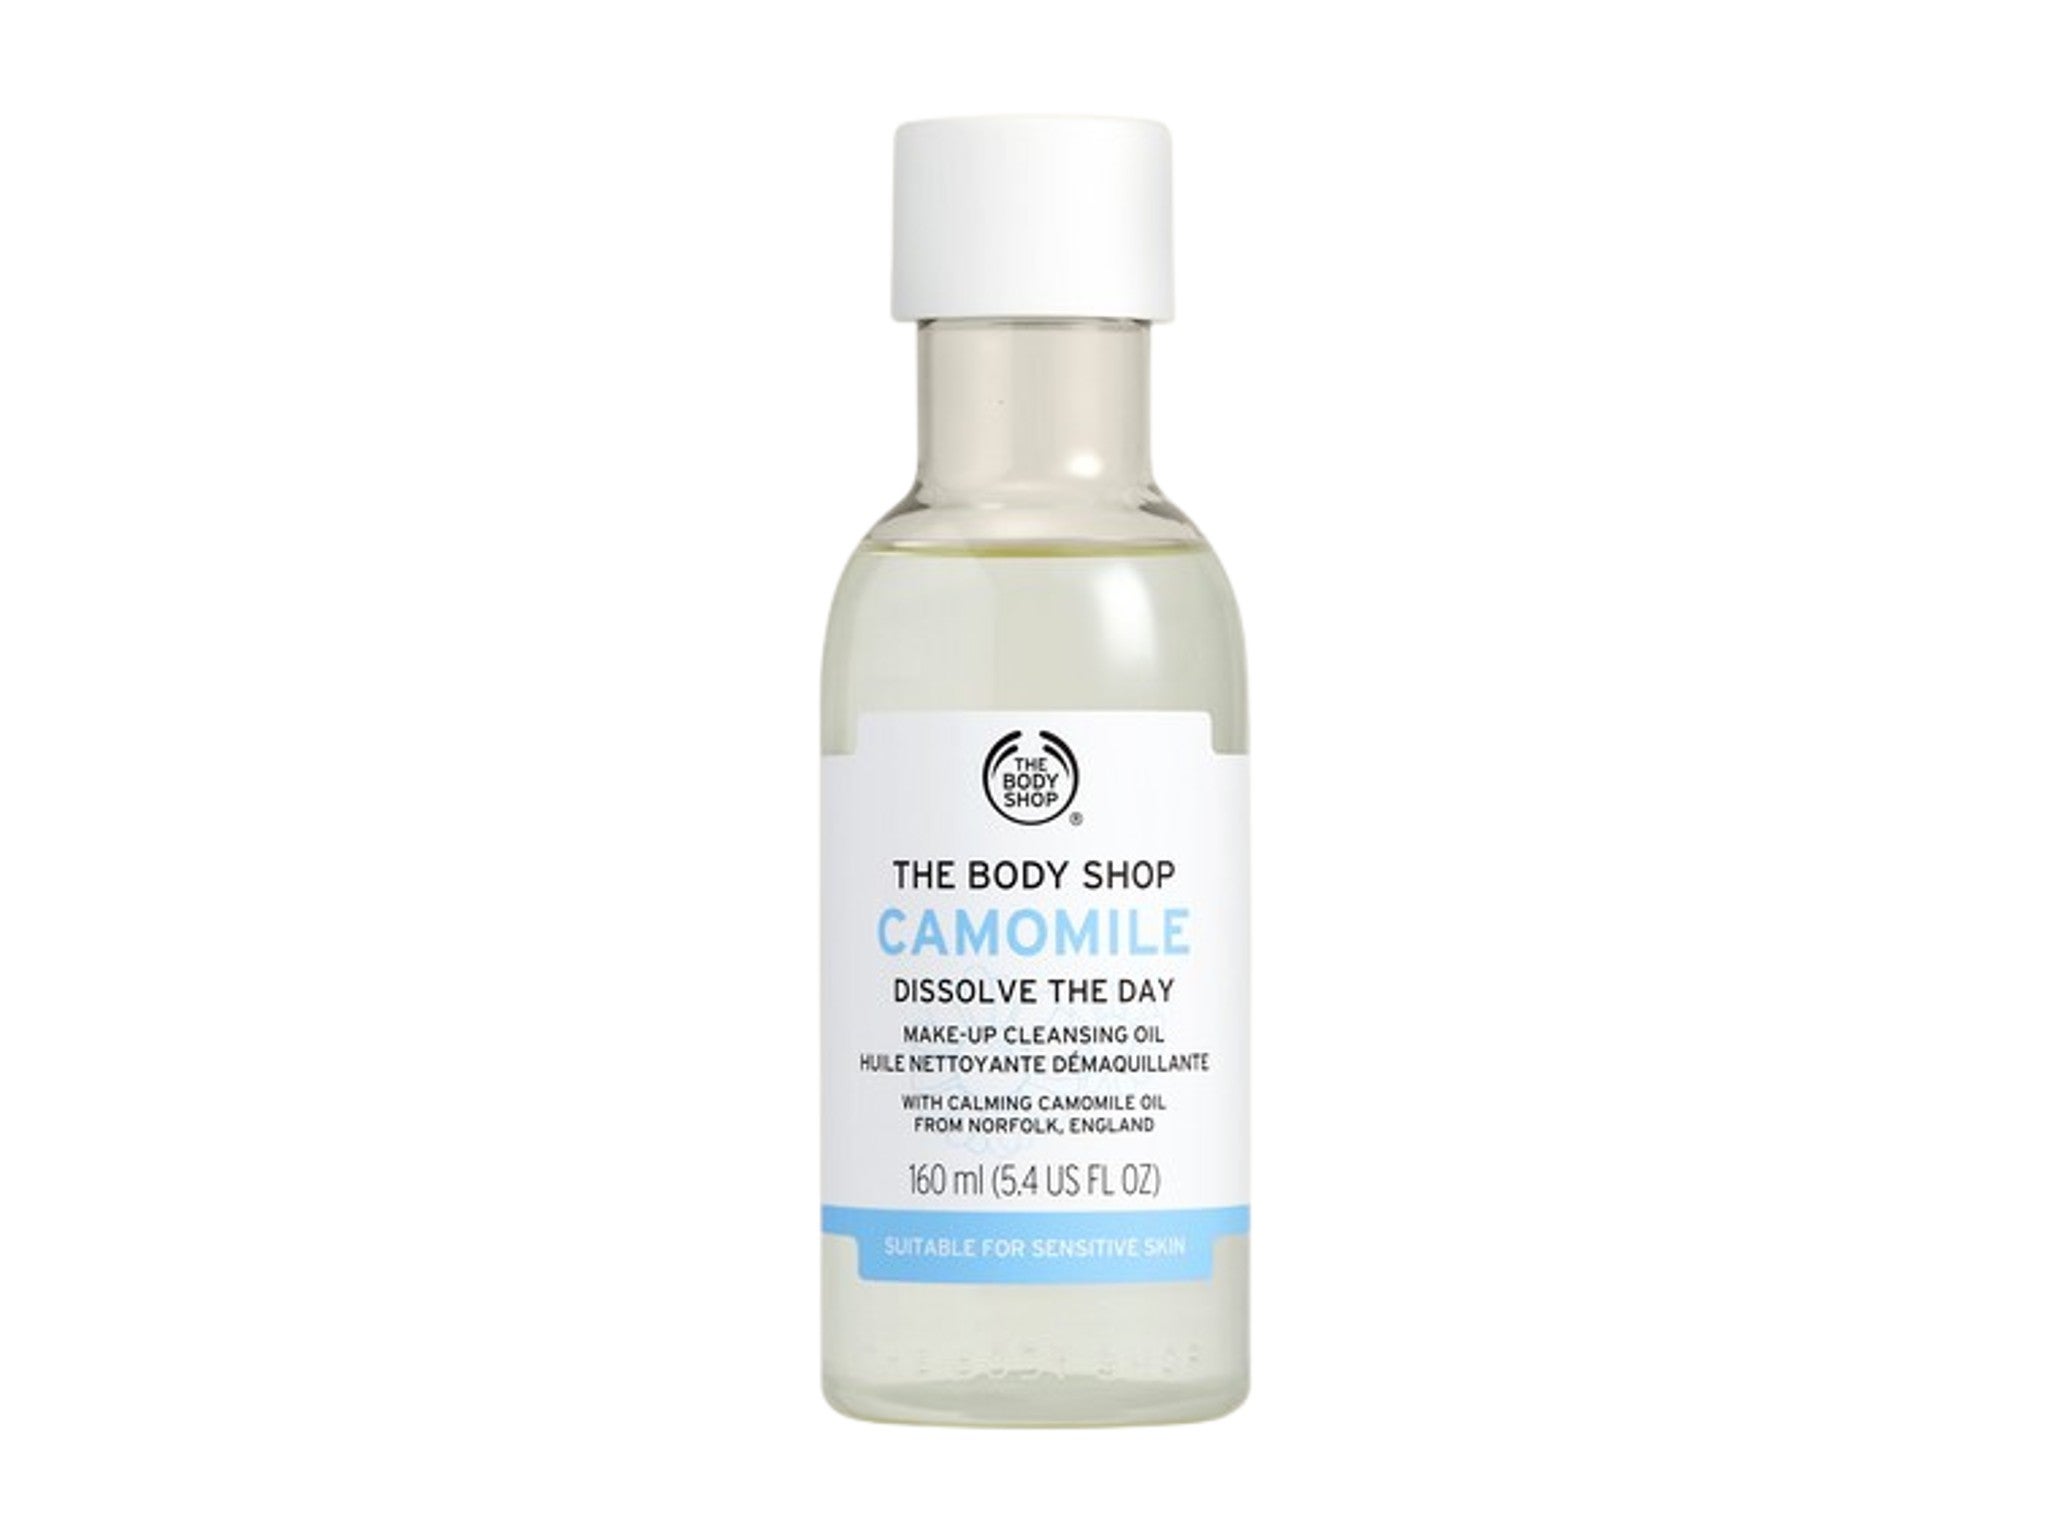 The Body Shop camomile dissolve the day make-up cleansing oil